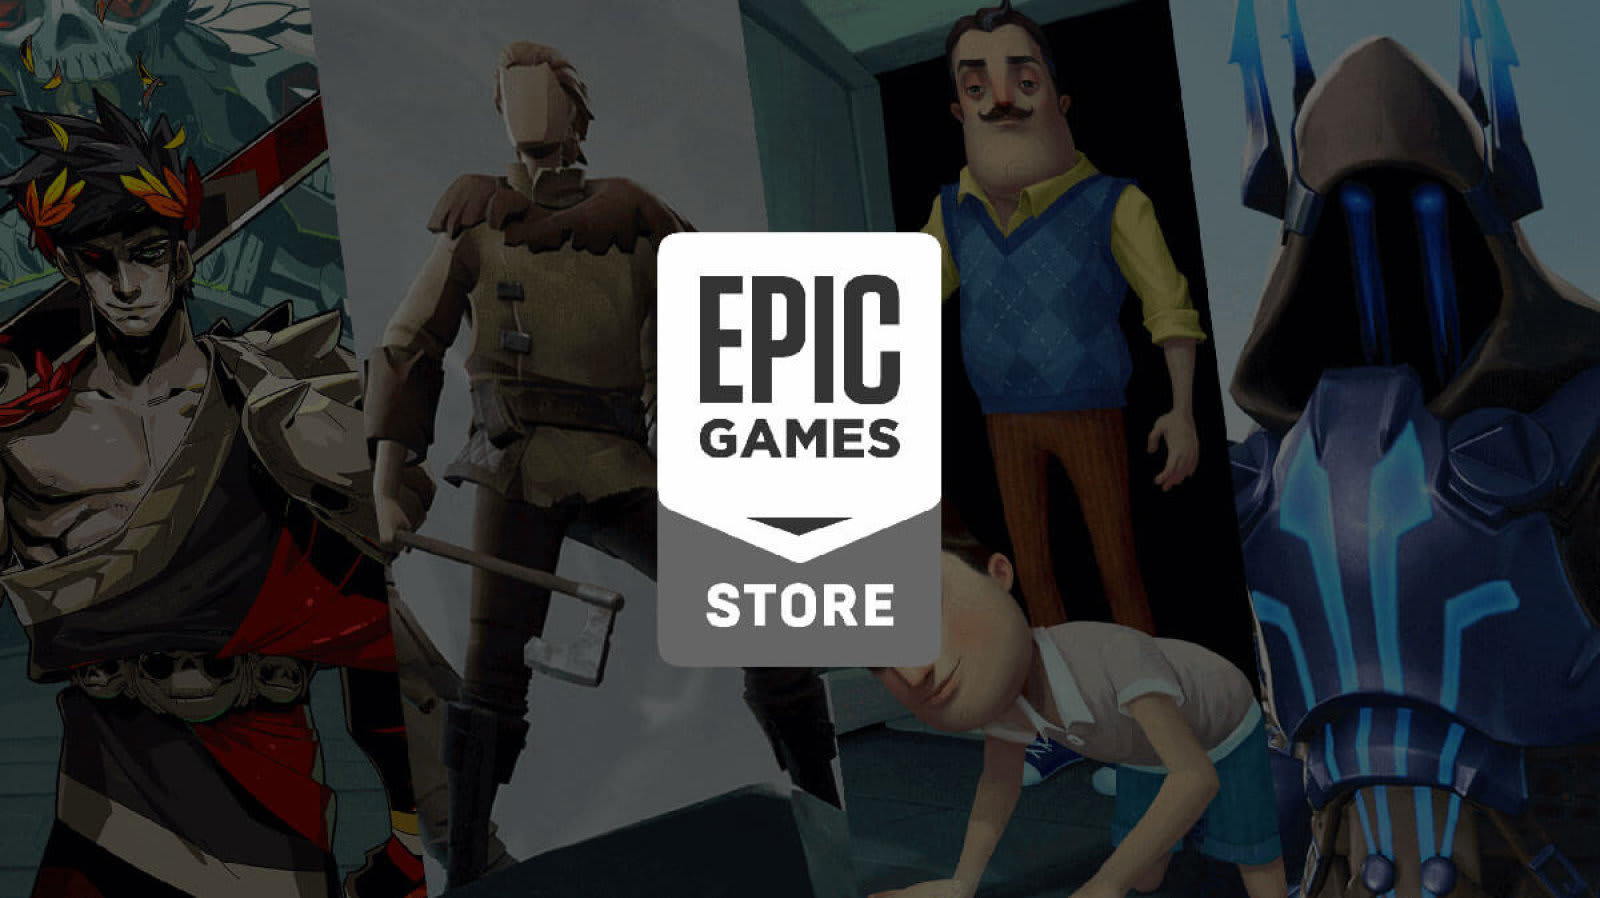 Epic Gamesストア 週替り無料ゲームを年も継続 Engadget 日本版